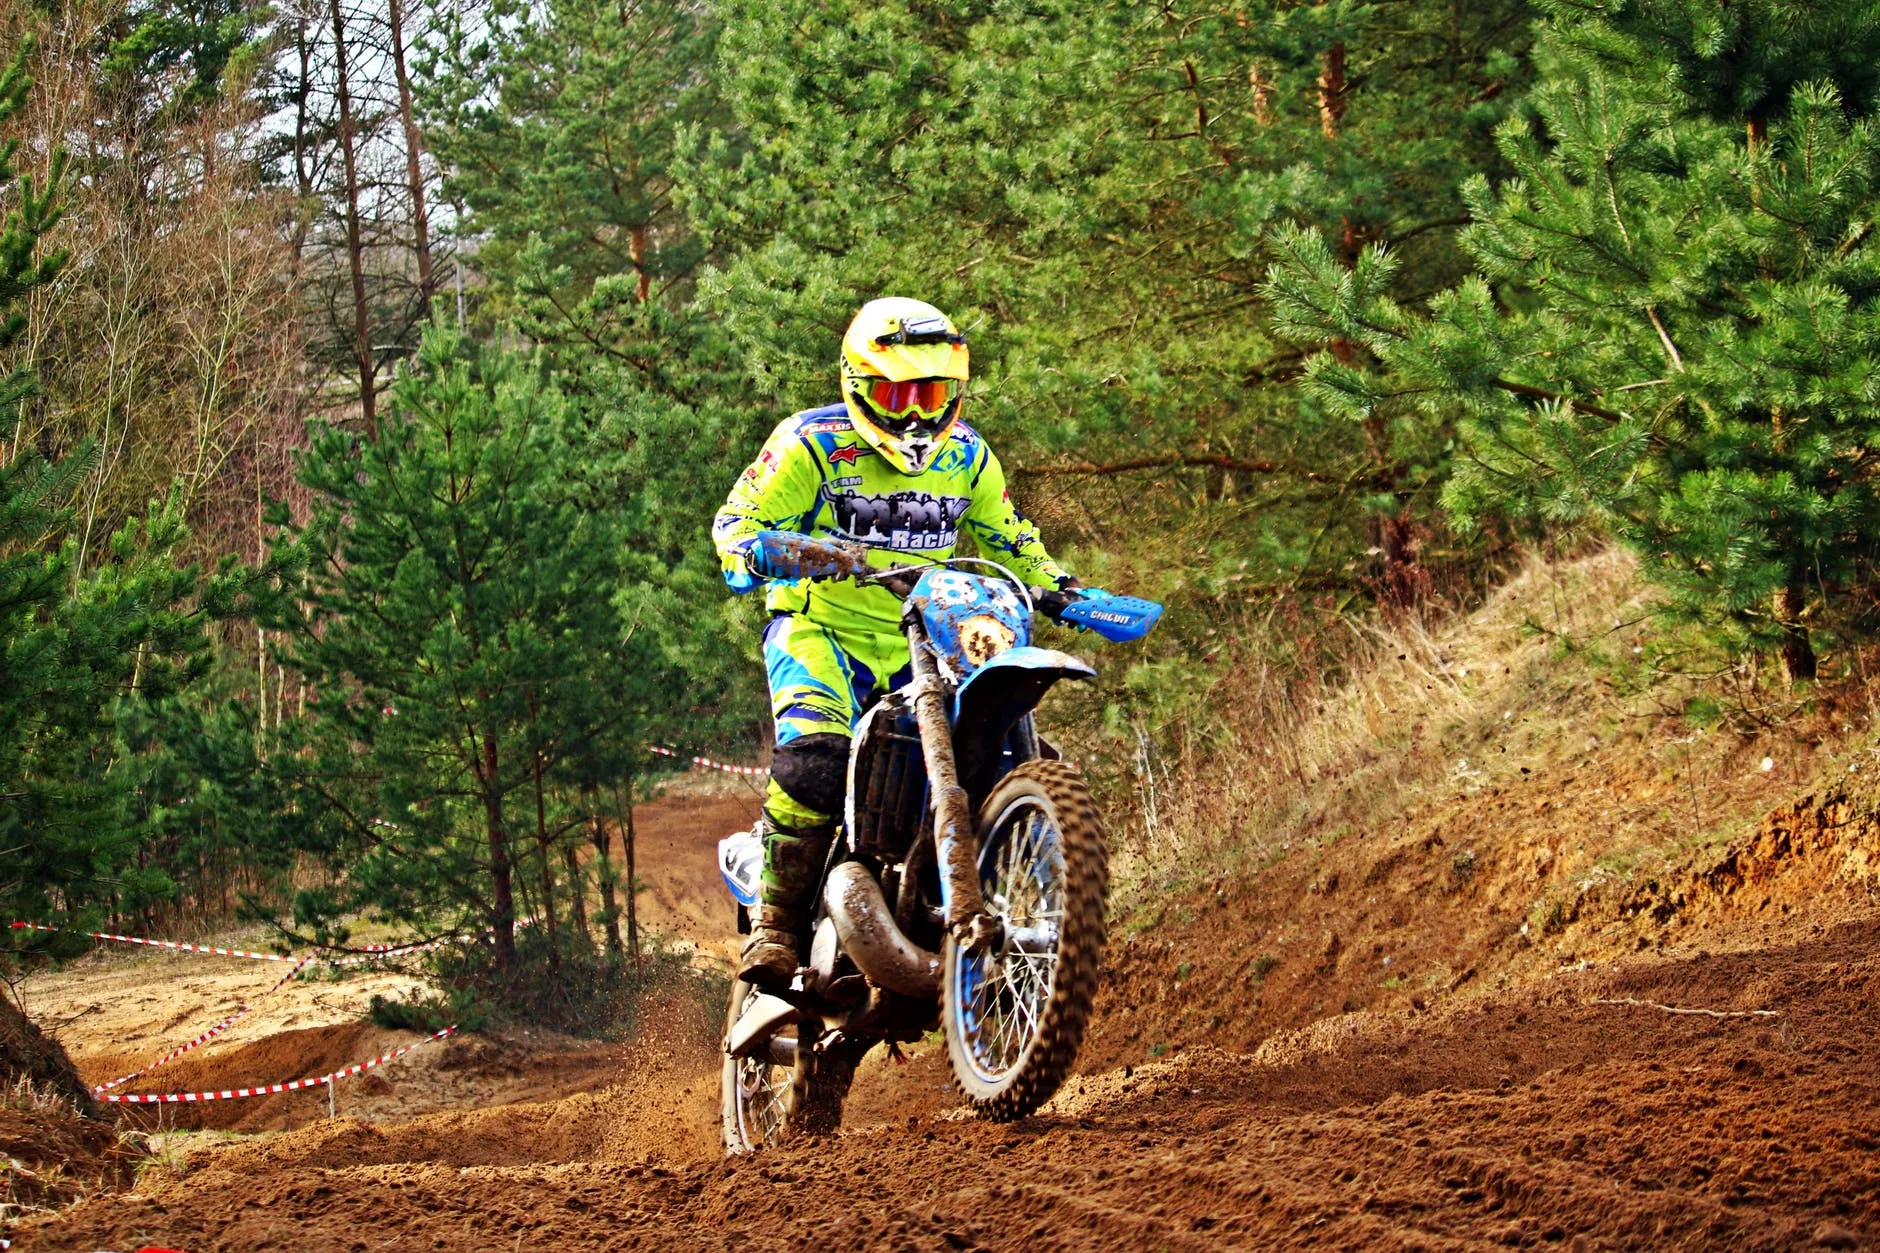 Motopark Training Facility in Canada, North America | Motorcycles - Rated 0.9